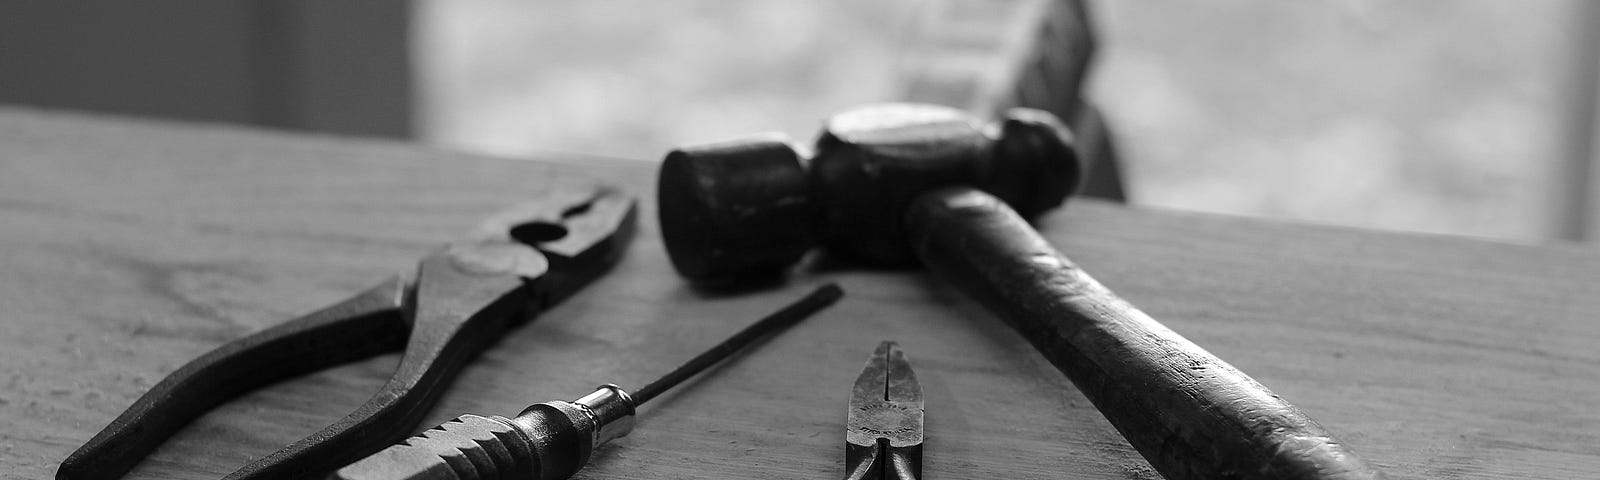 black and white photo of tools